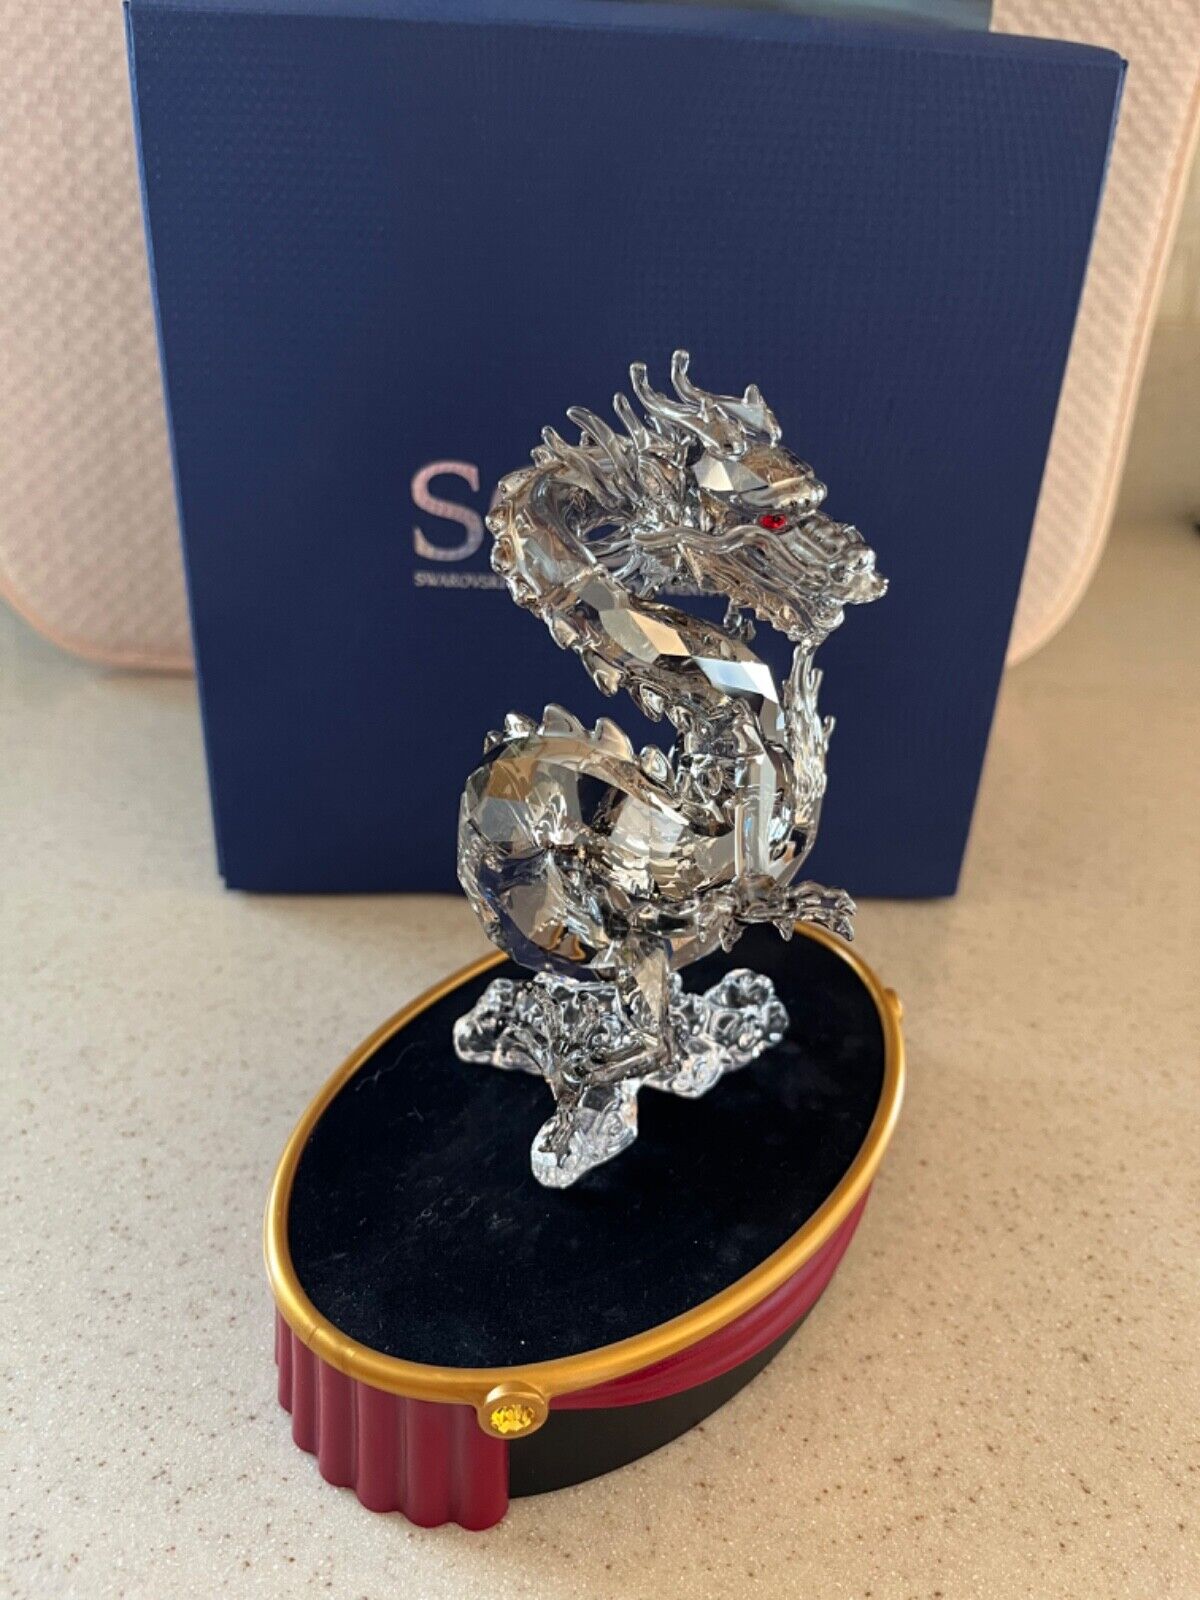 Swarovski Crystal 2012 SCS 25 Dragon Jubilee Edition 1096752 In Box with stand